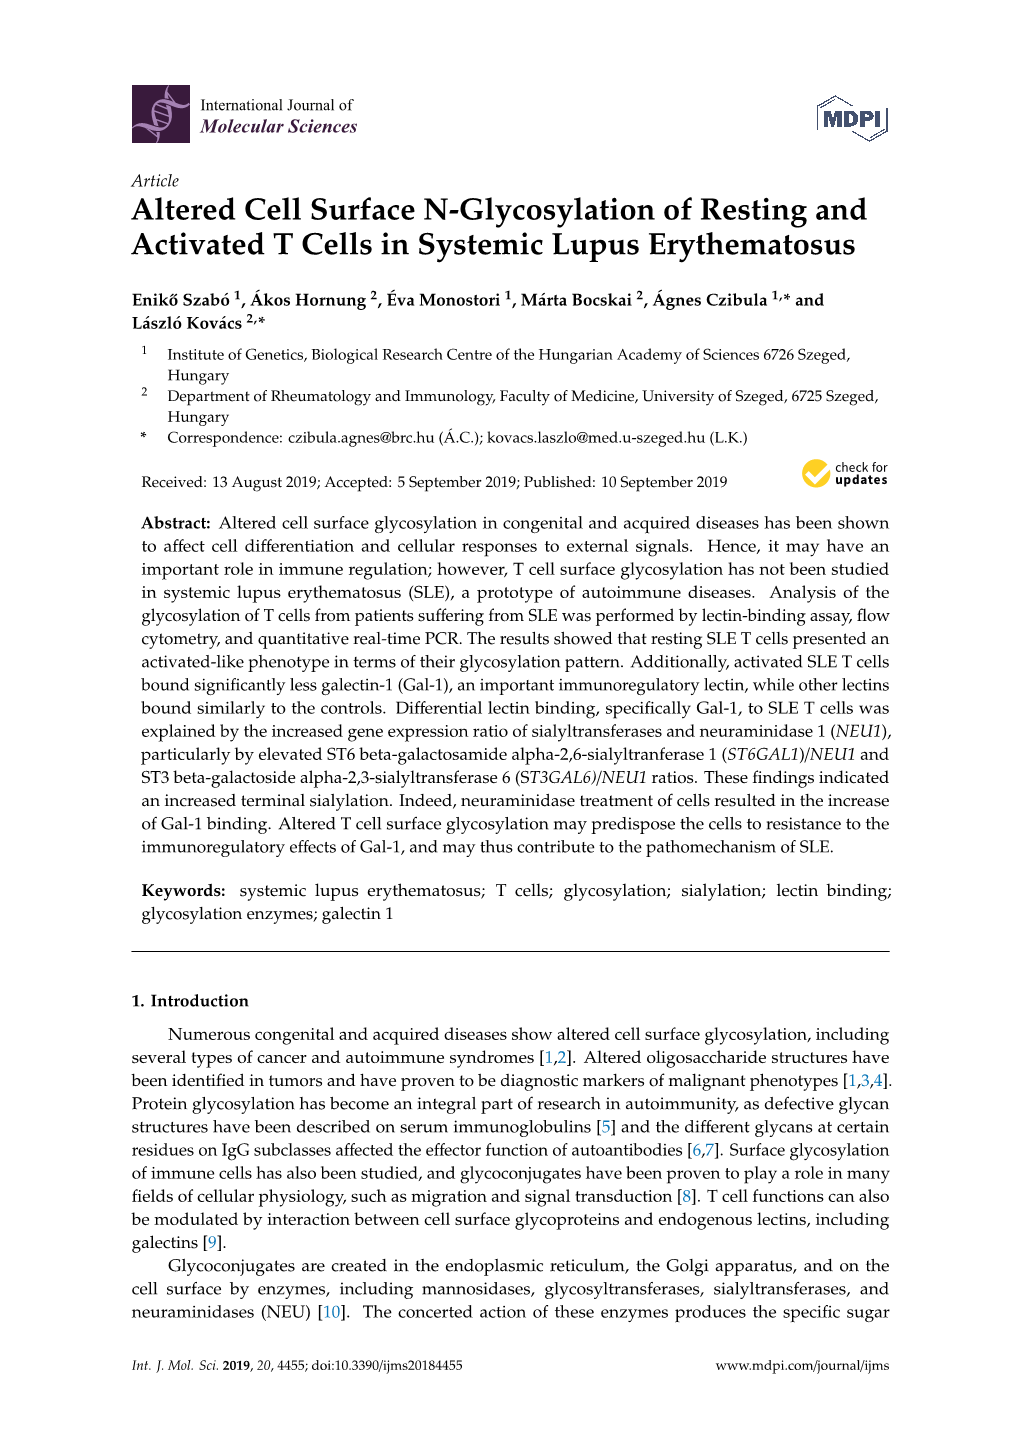 Altered Cell Surface N-Glycosylation of Resting and Activated T Cells in Systemic Lupus Erythematosus